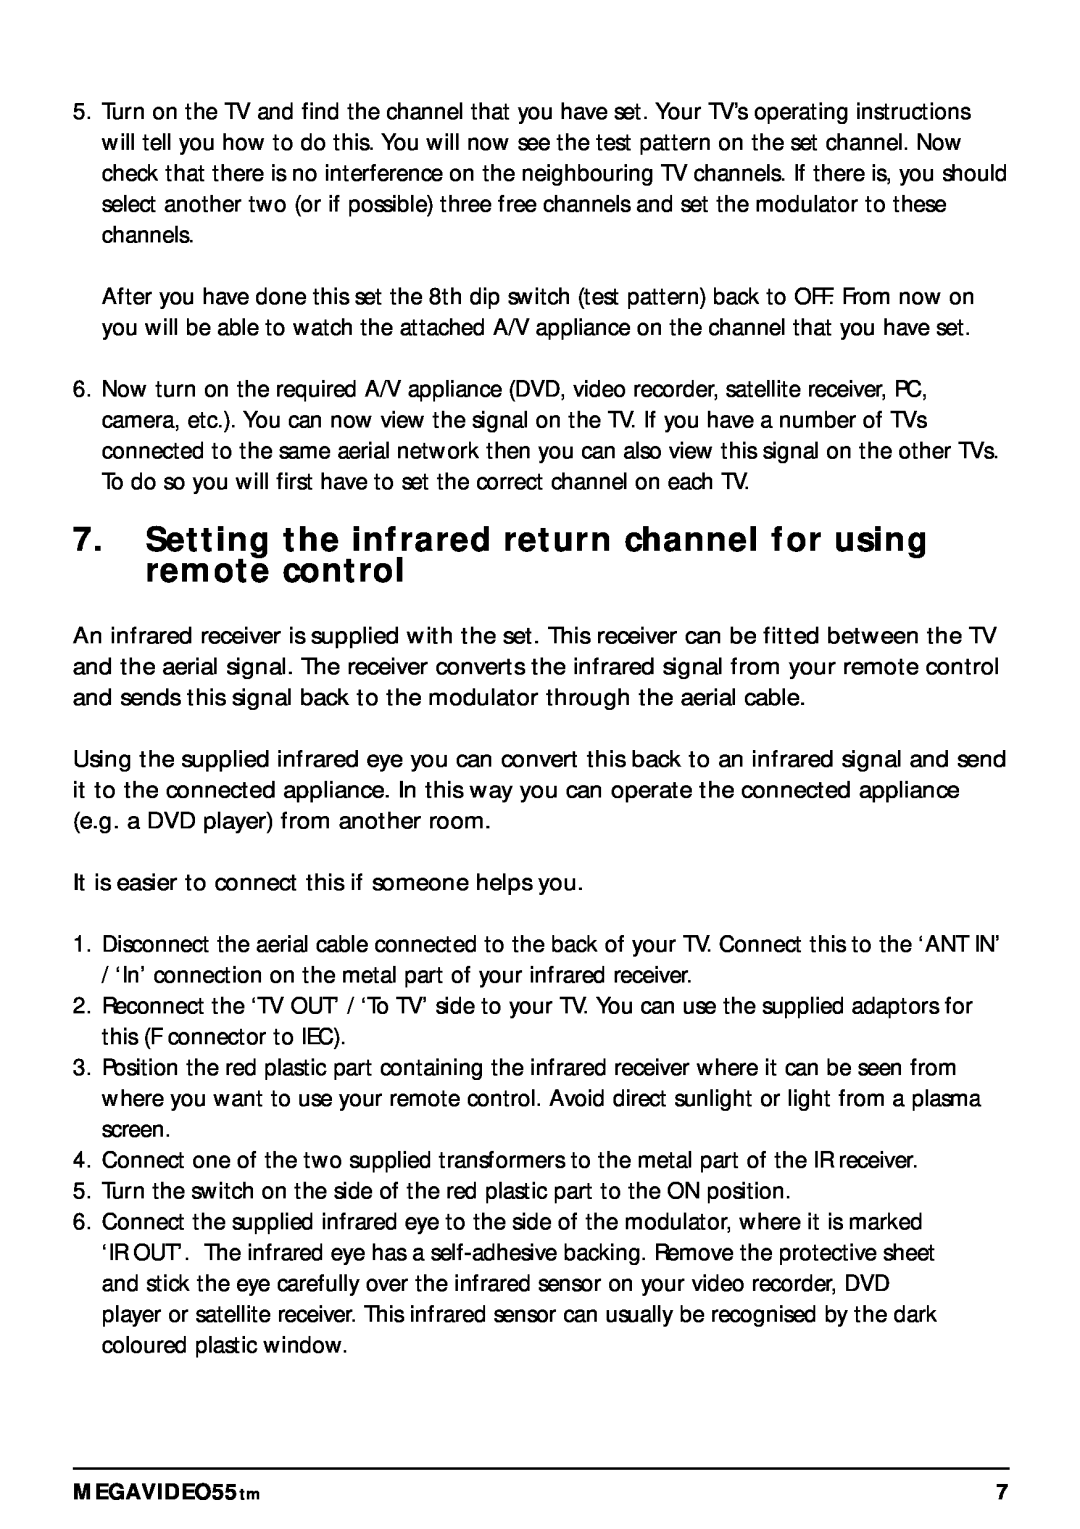 Marmitek 20068 / 300704 operating instructions Setting the infrared return channel for using remote control 